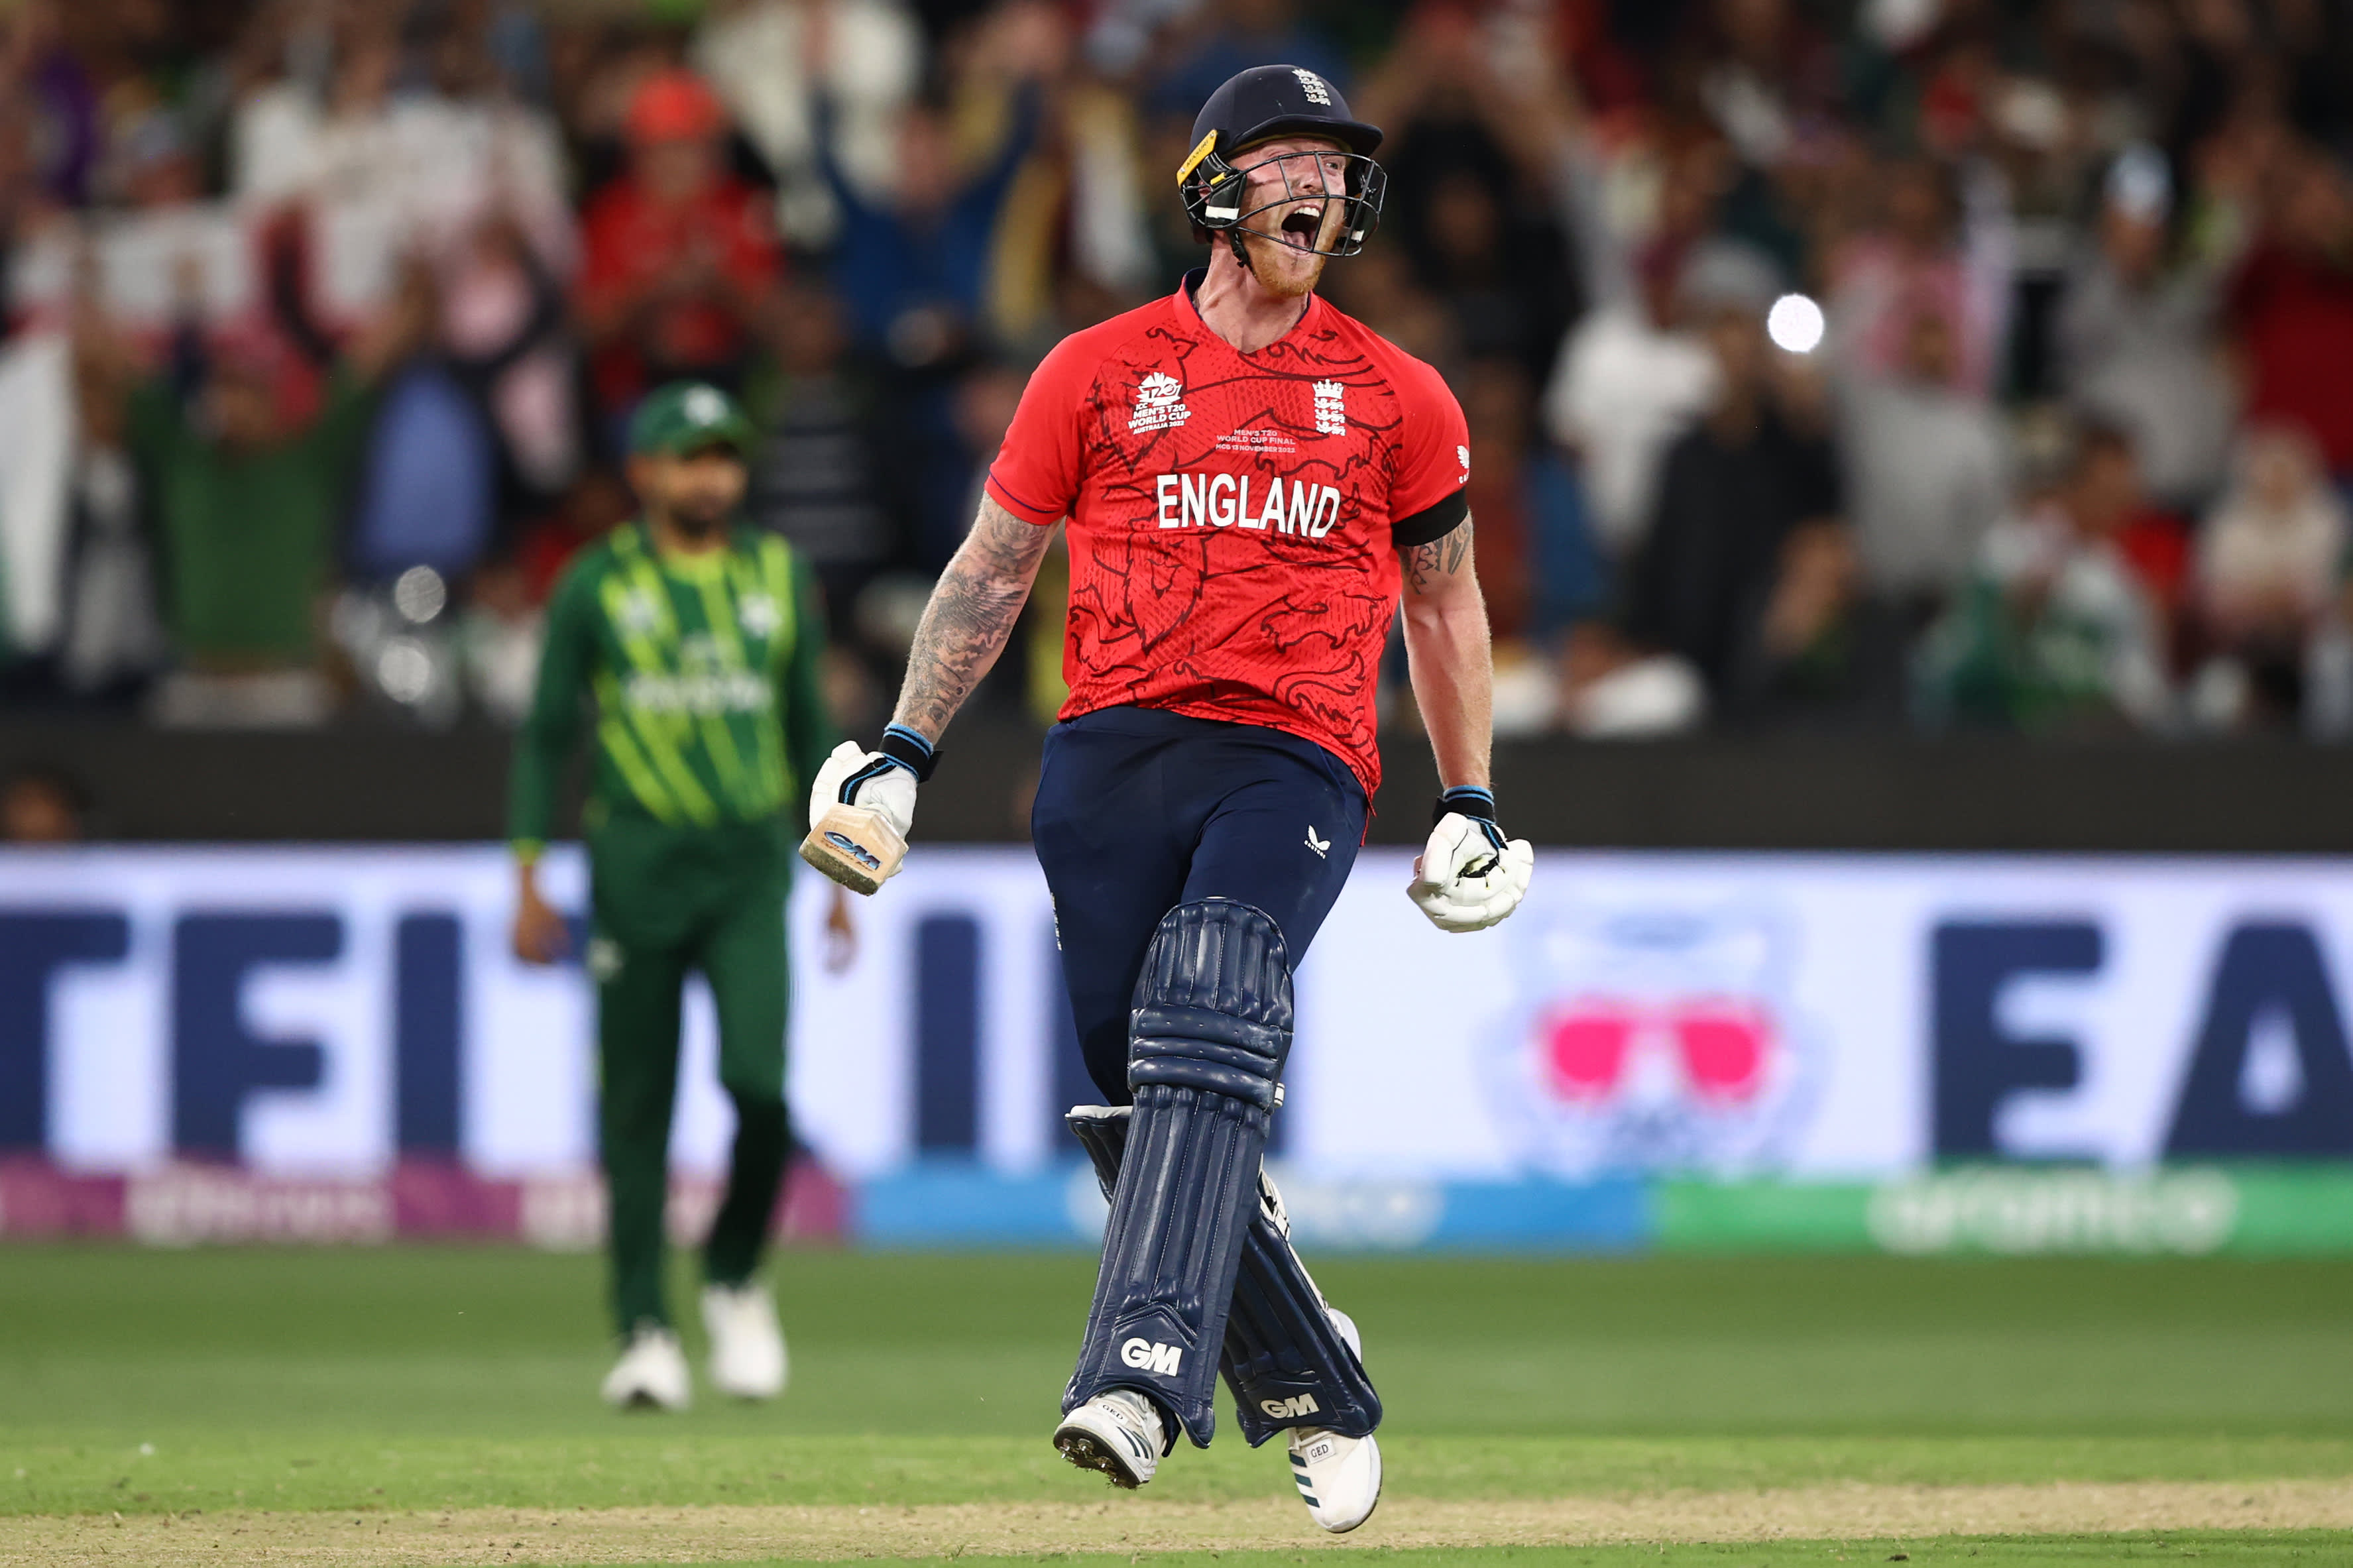 England beat Pakistan to win T20 World Cup at MCG as Ben Stokes stars yet again in a final